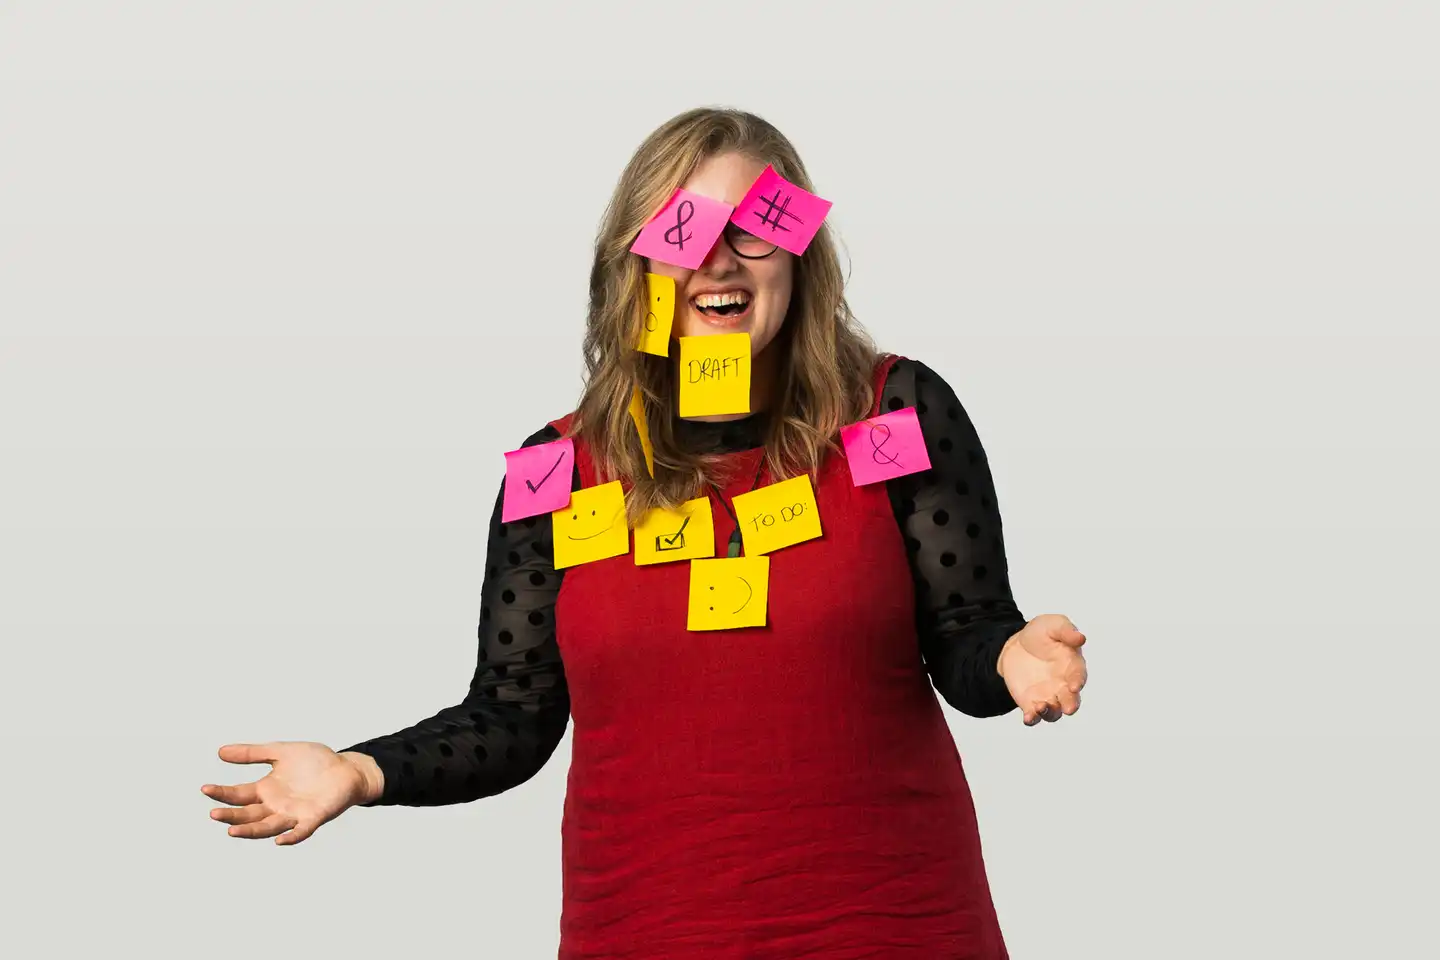 Lucy covered in post-it notes